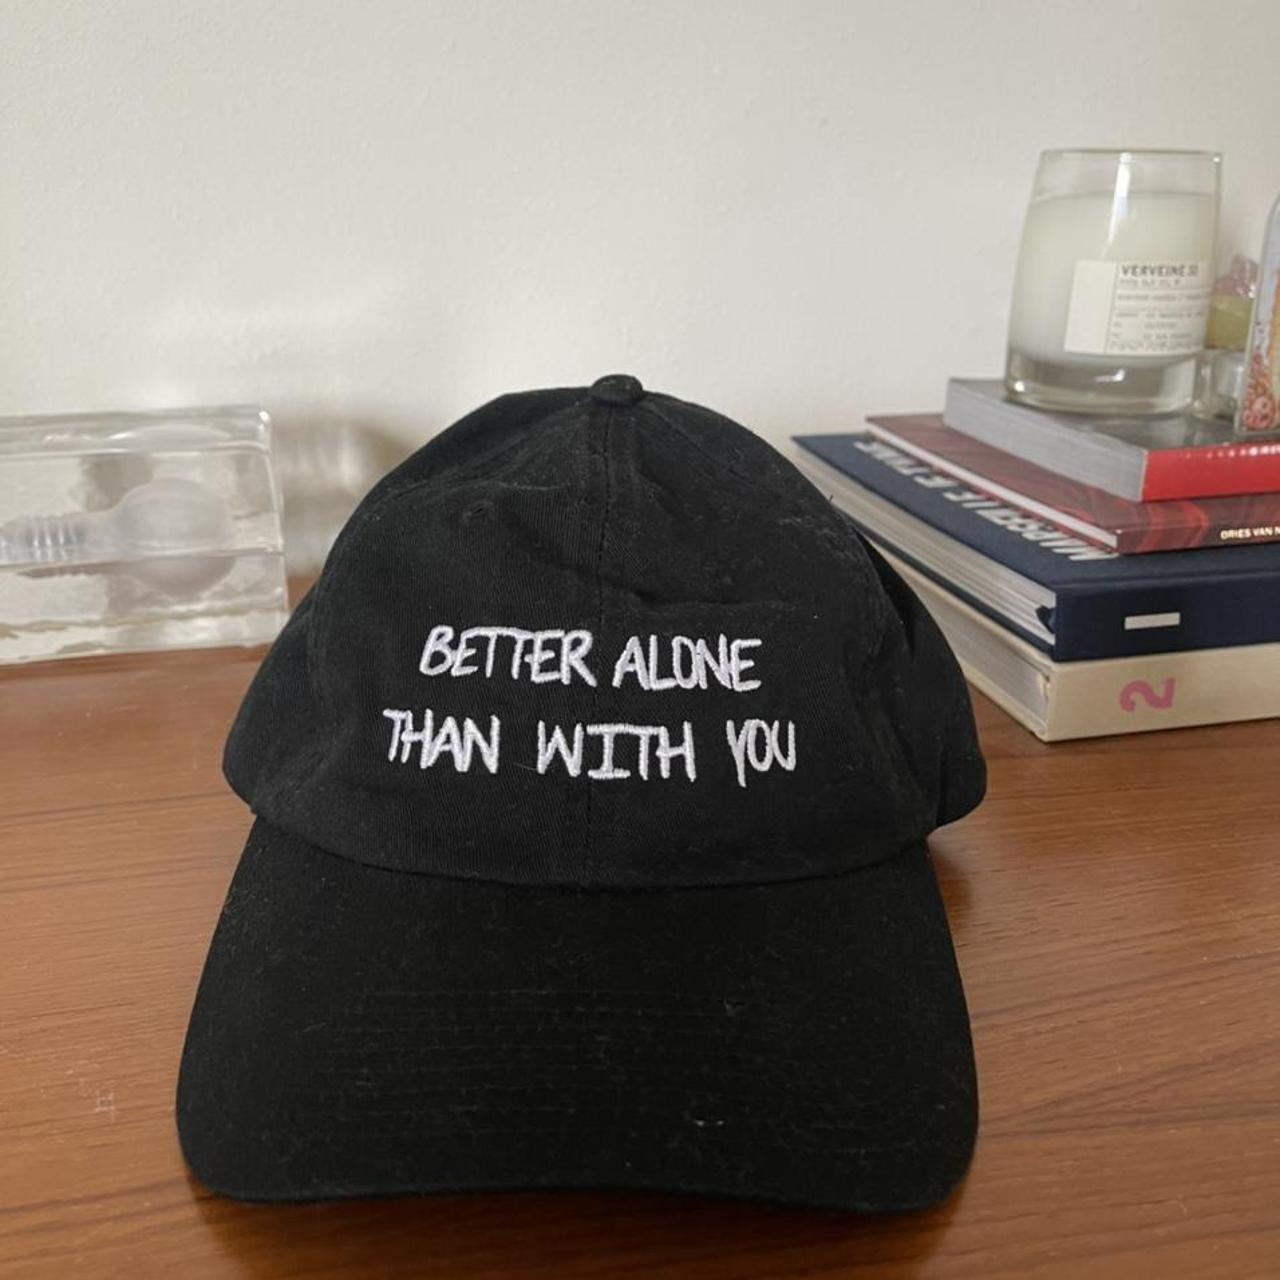 Product Image 1 - Better alone than with you